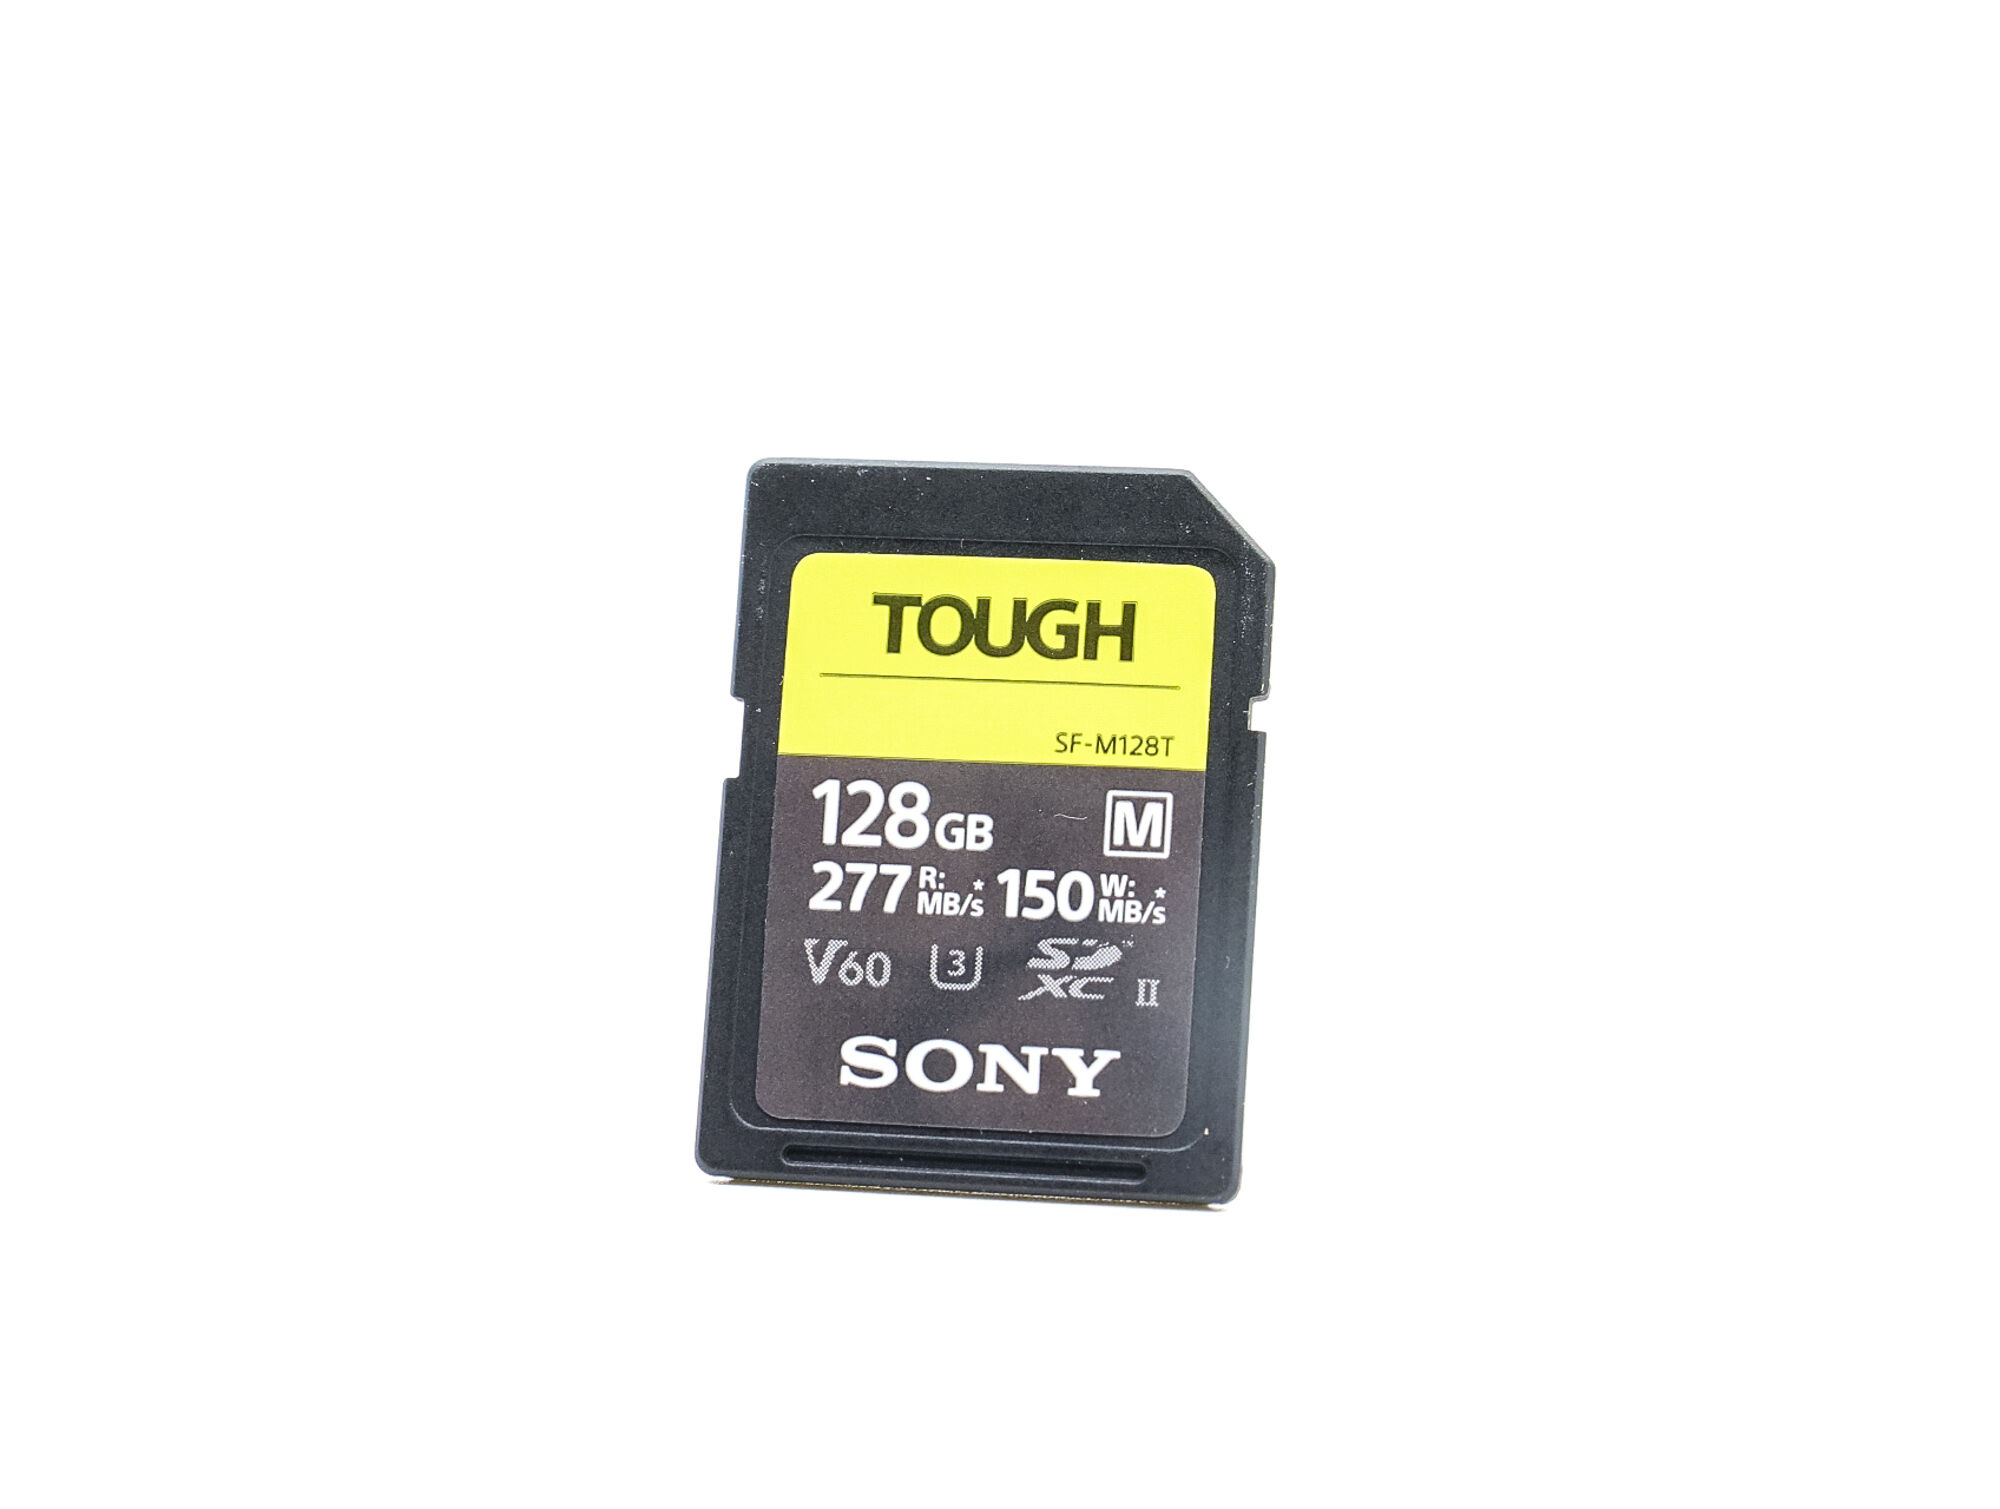 Sony 128GB SF-M Tough SDXC Card (Condition: Like New)